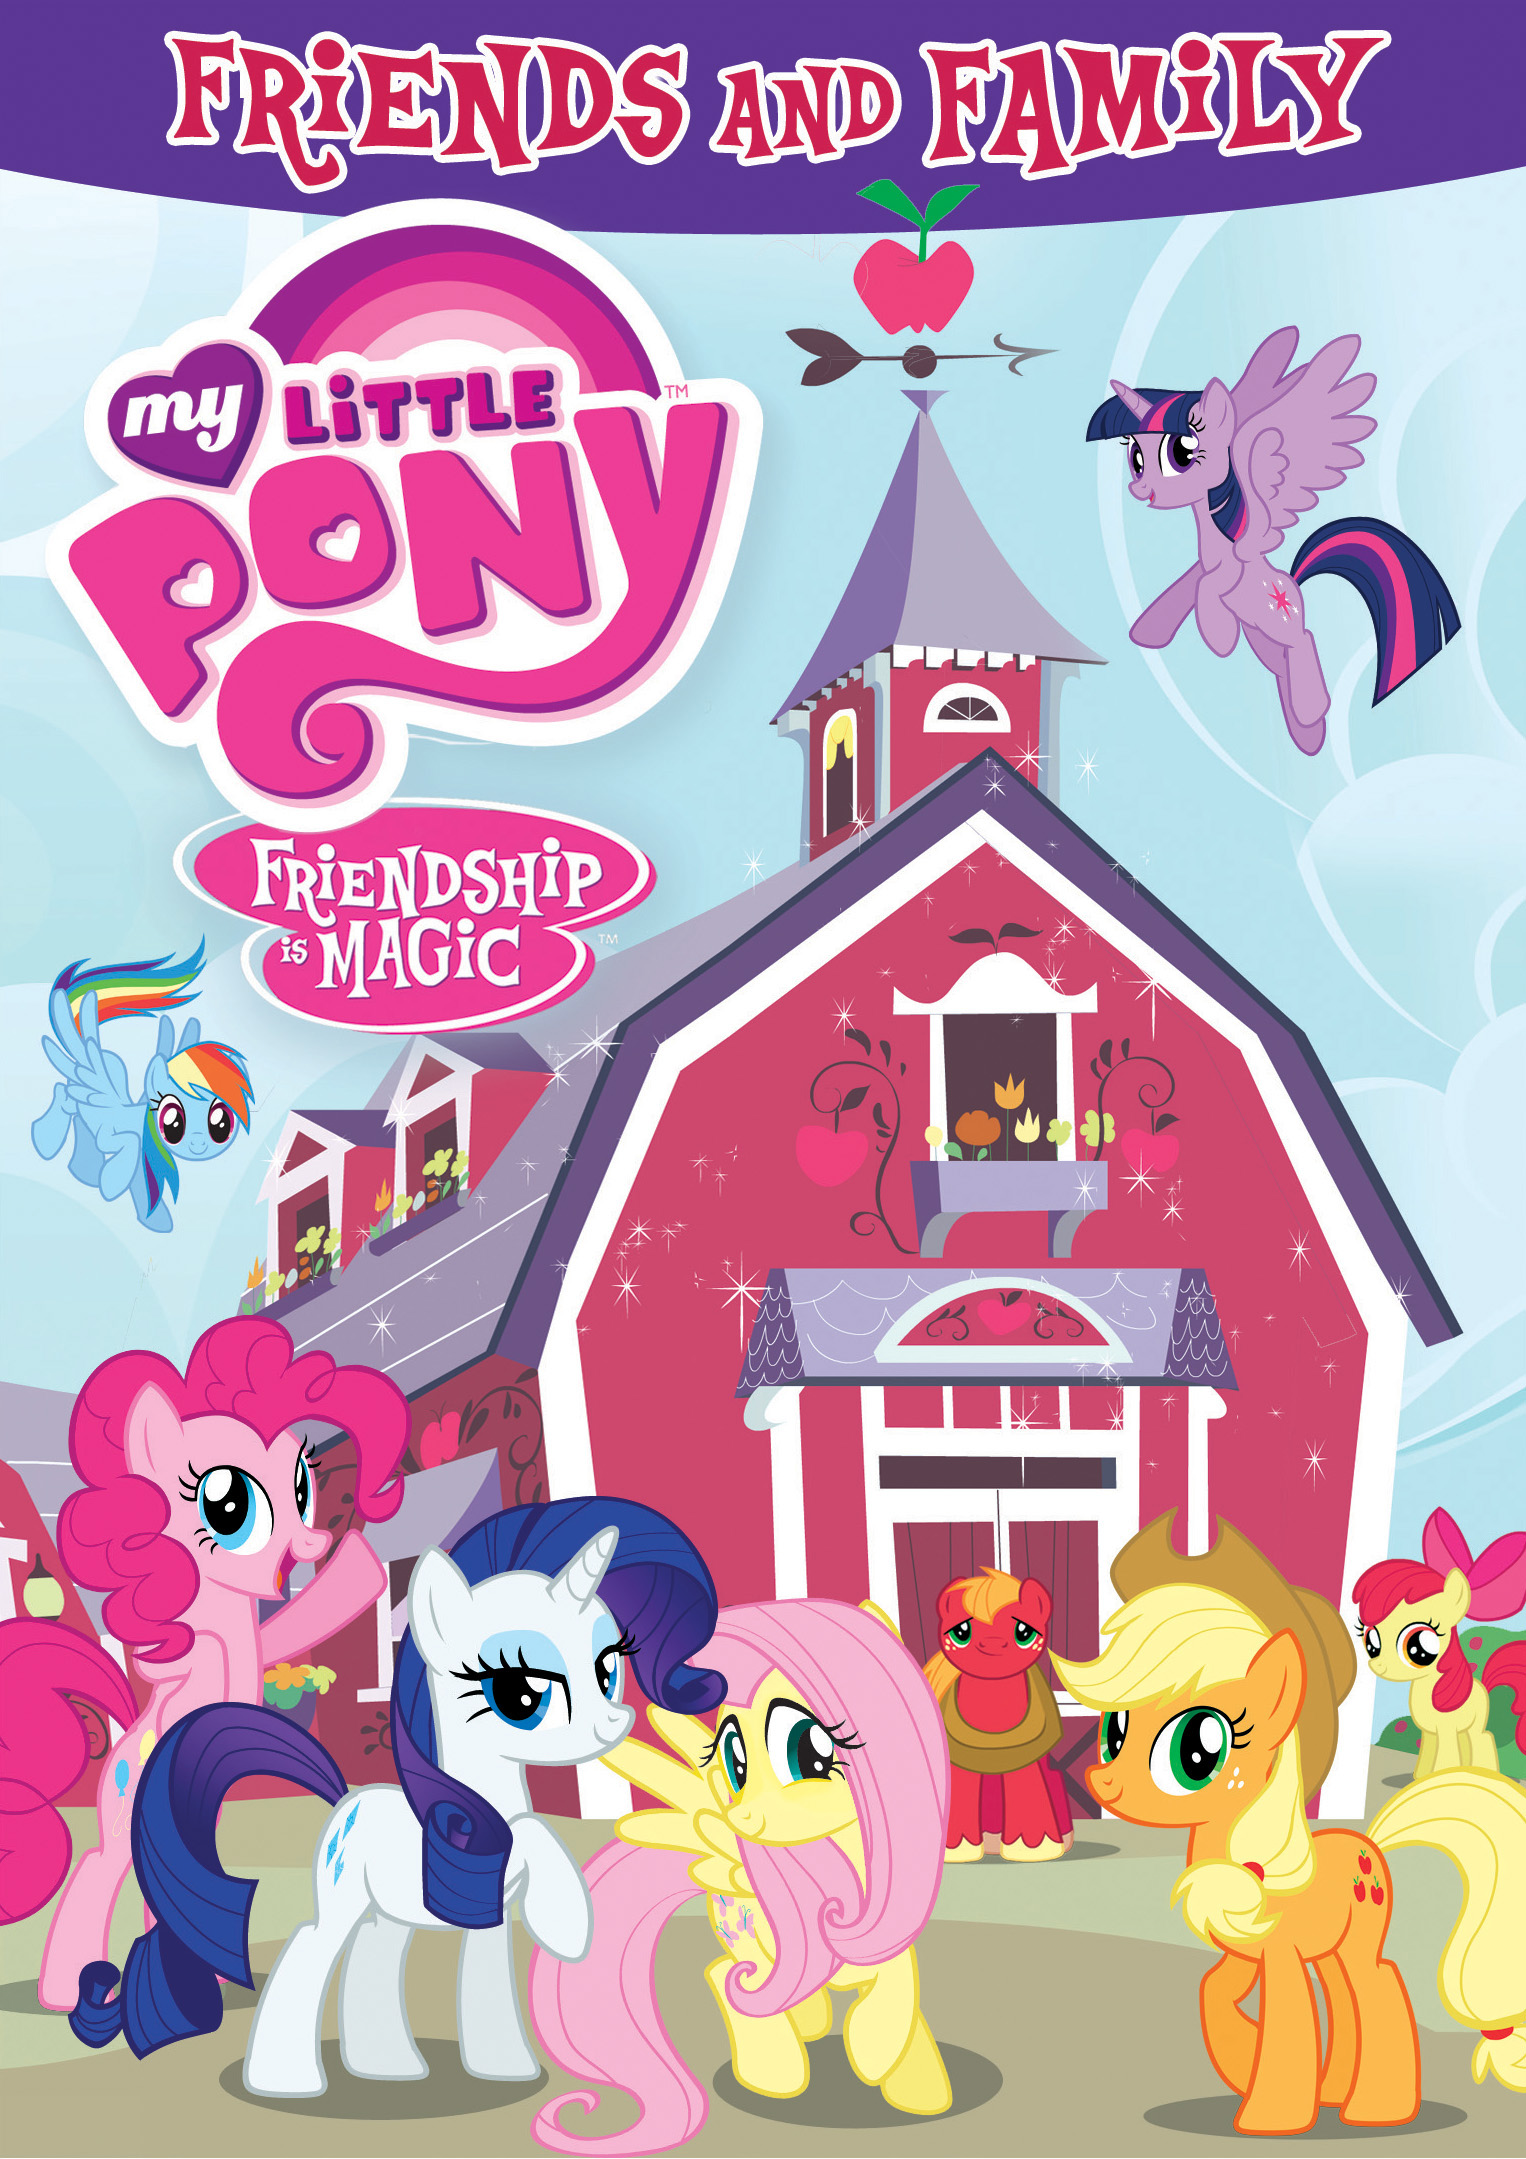 My Little Pony: Friendship Is Magic Friends & Family